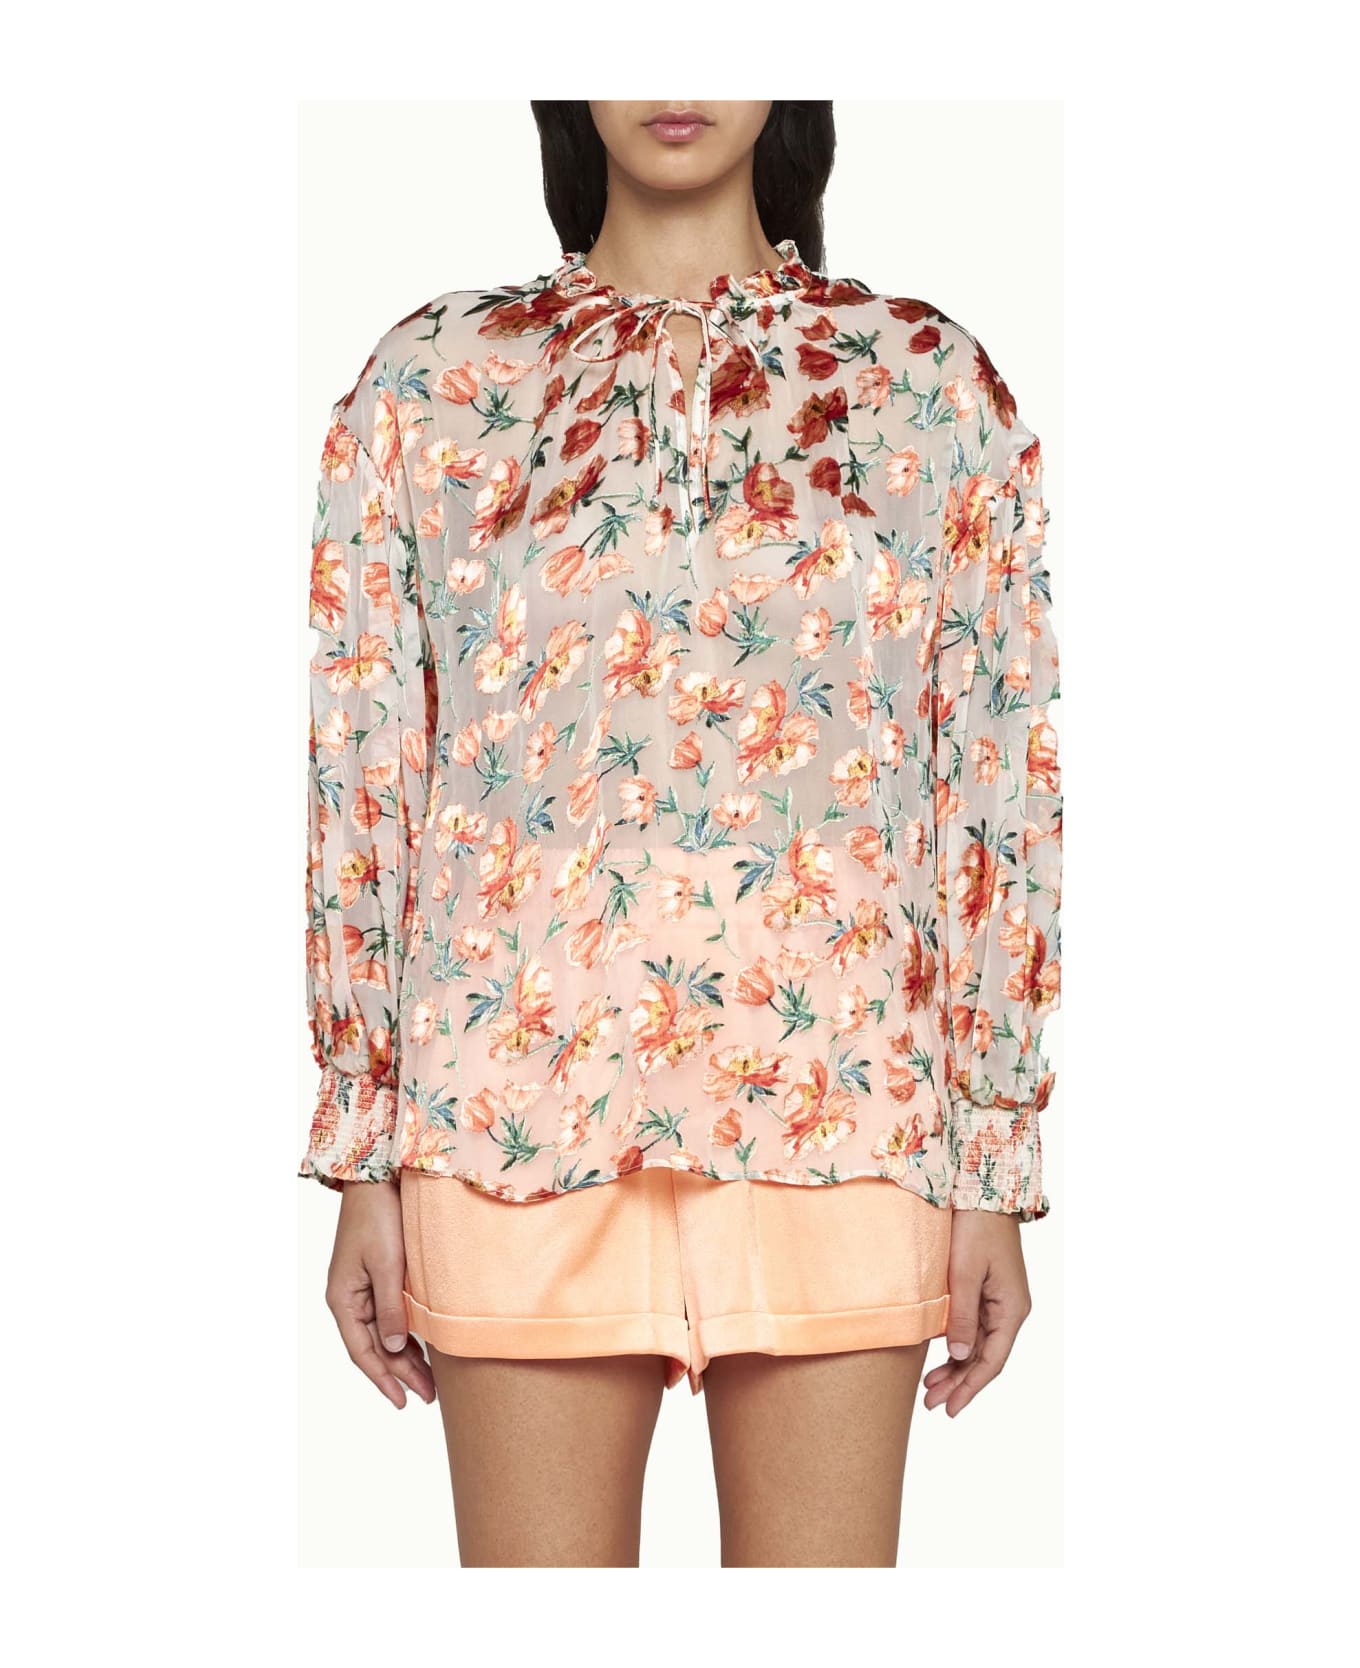 Alice + Olivia Shirt - Falling for you off white